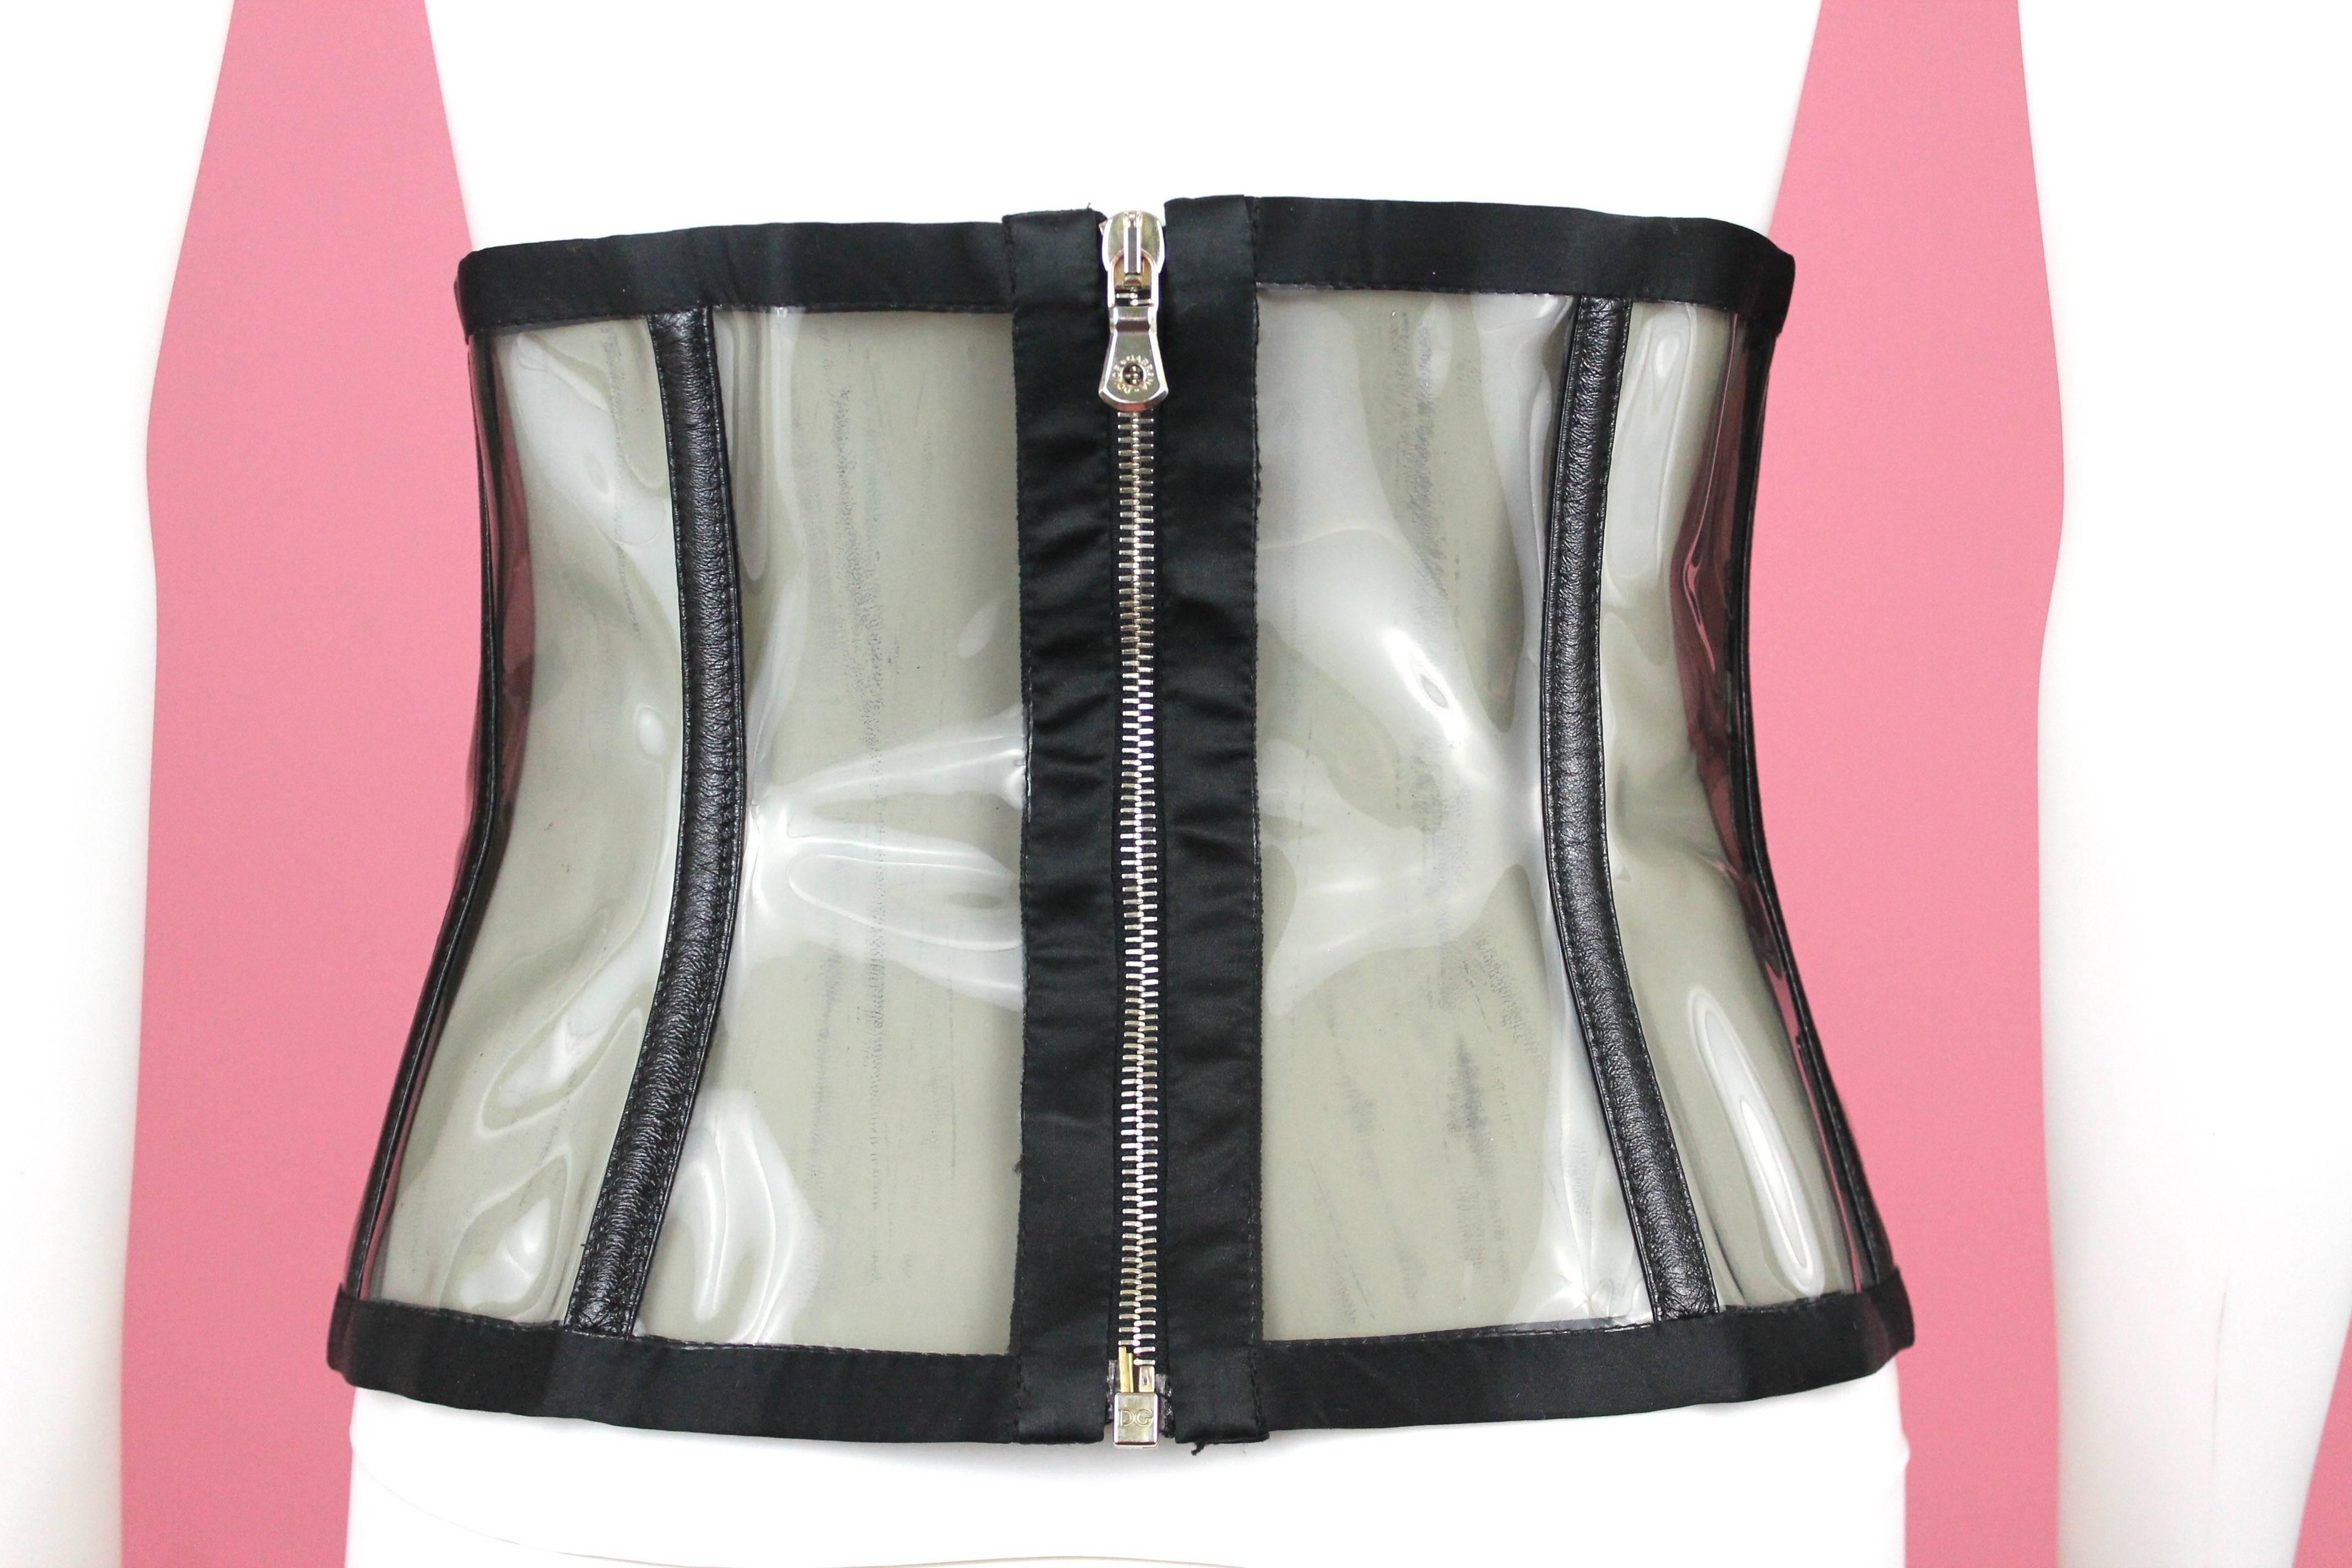 -Waist cincher from Italian label Dolce & Gabbana, sen on the Spring Summer 2007 runway shoe 
-Incredibly versatile piece made from leather, silk, and PVC. Has 8 buckles in gold hardware that are adjustable 
-Boning is encased in silk.
-Made in